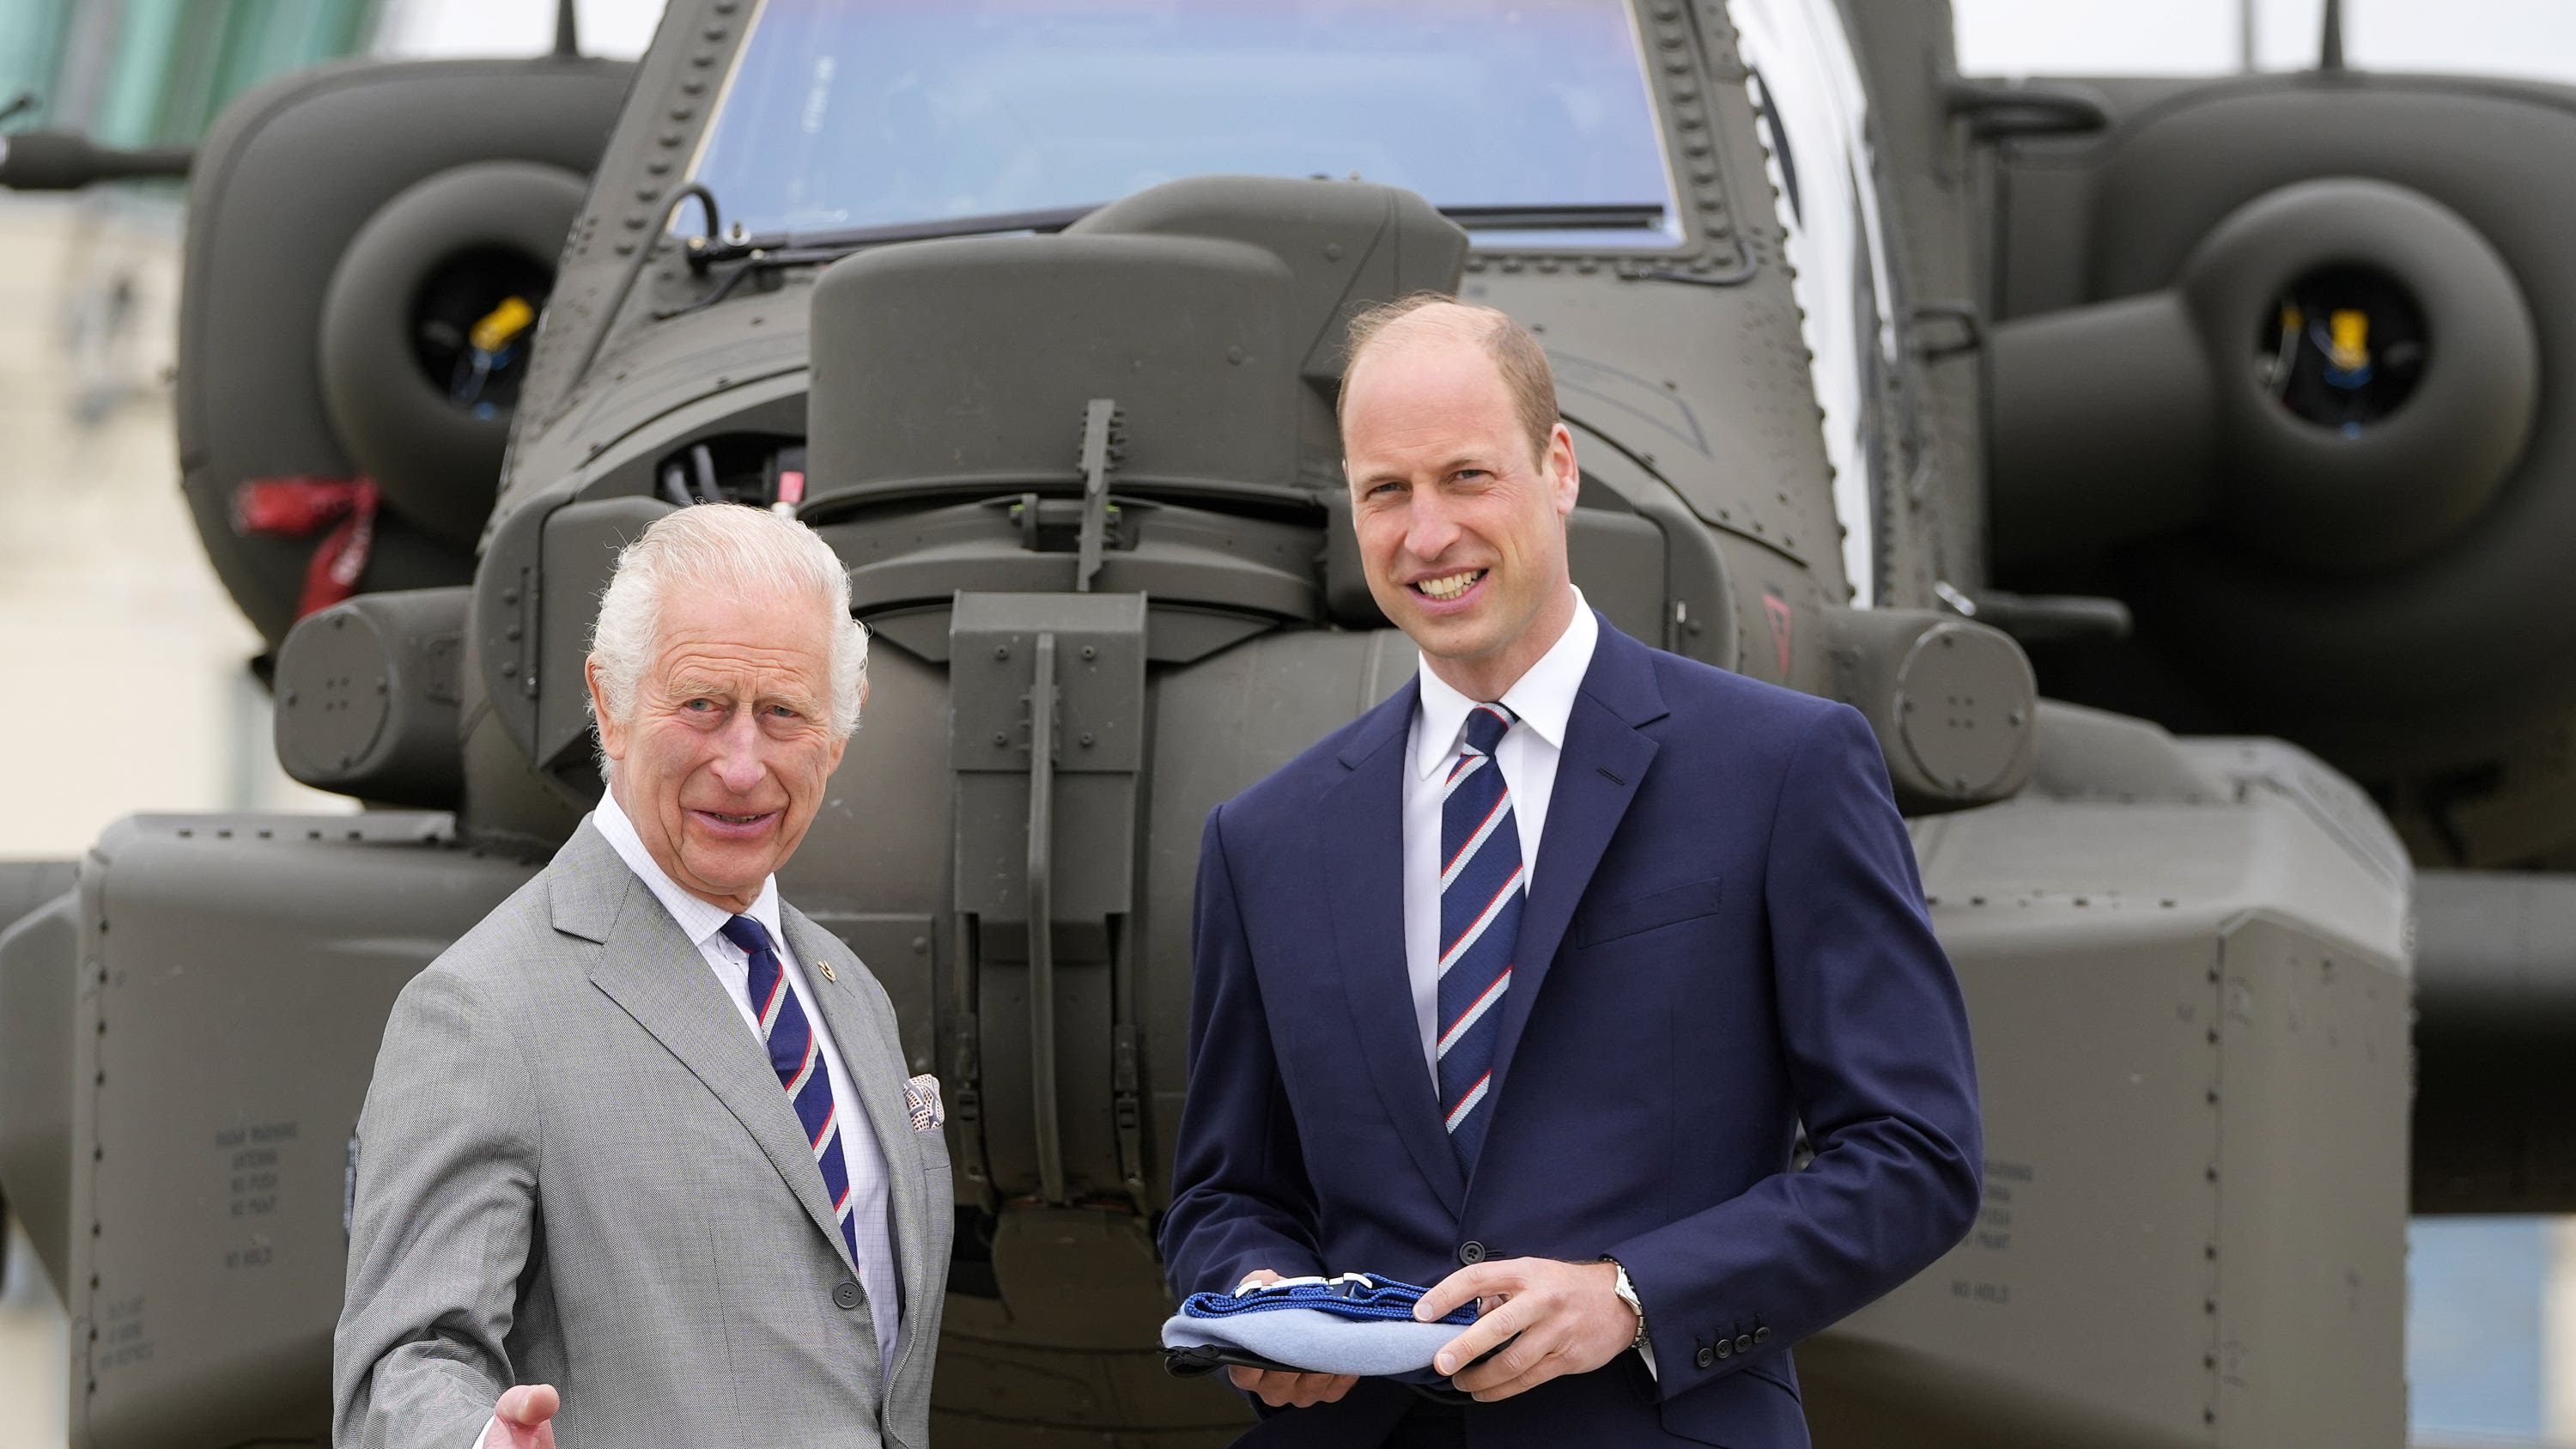 King hands military role to William during visit to Hampshire air base